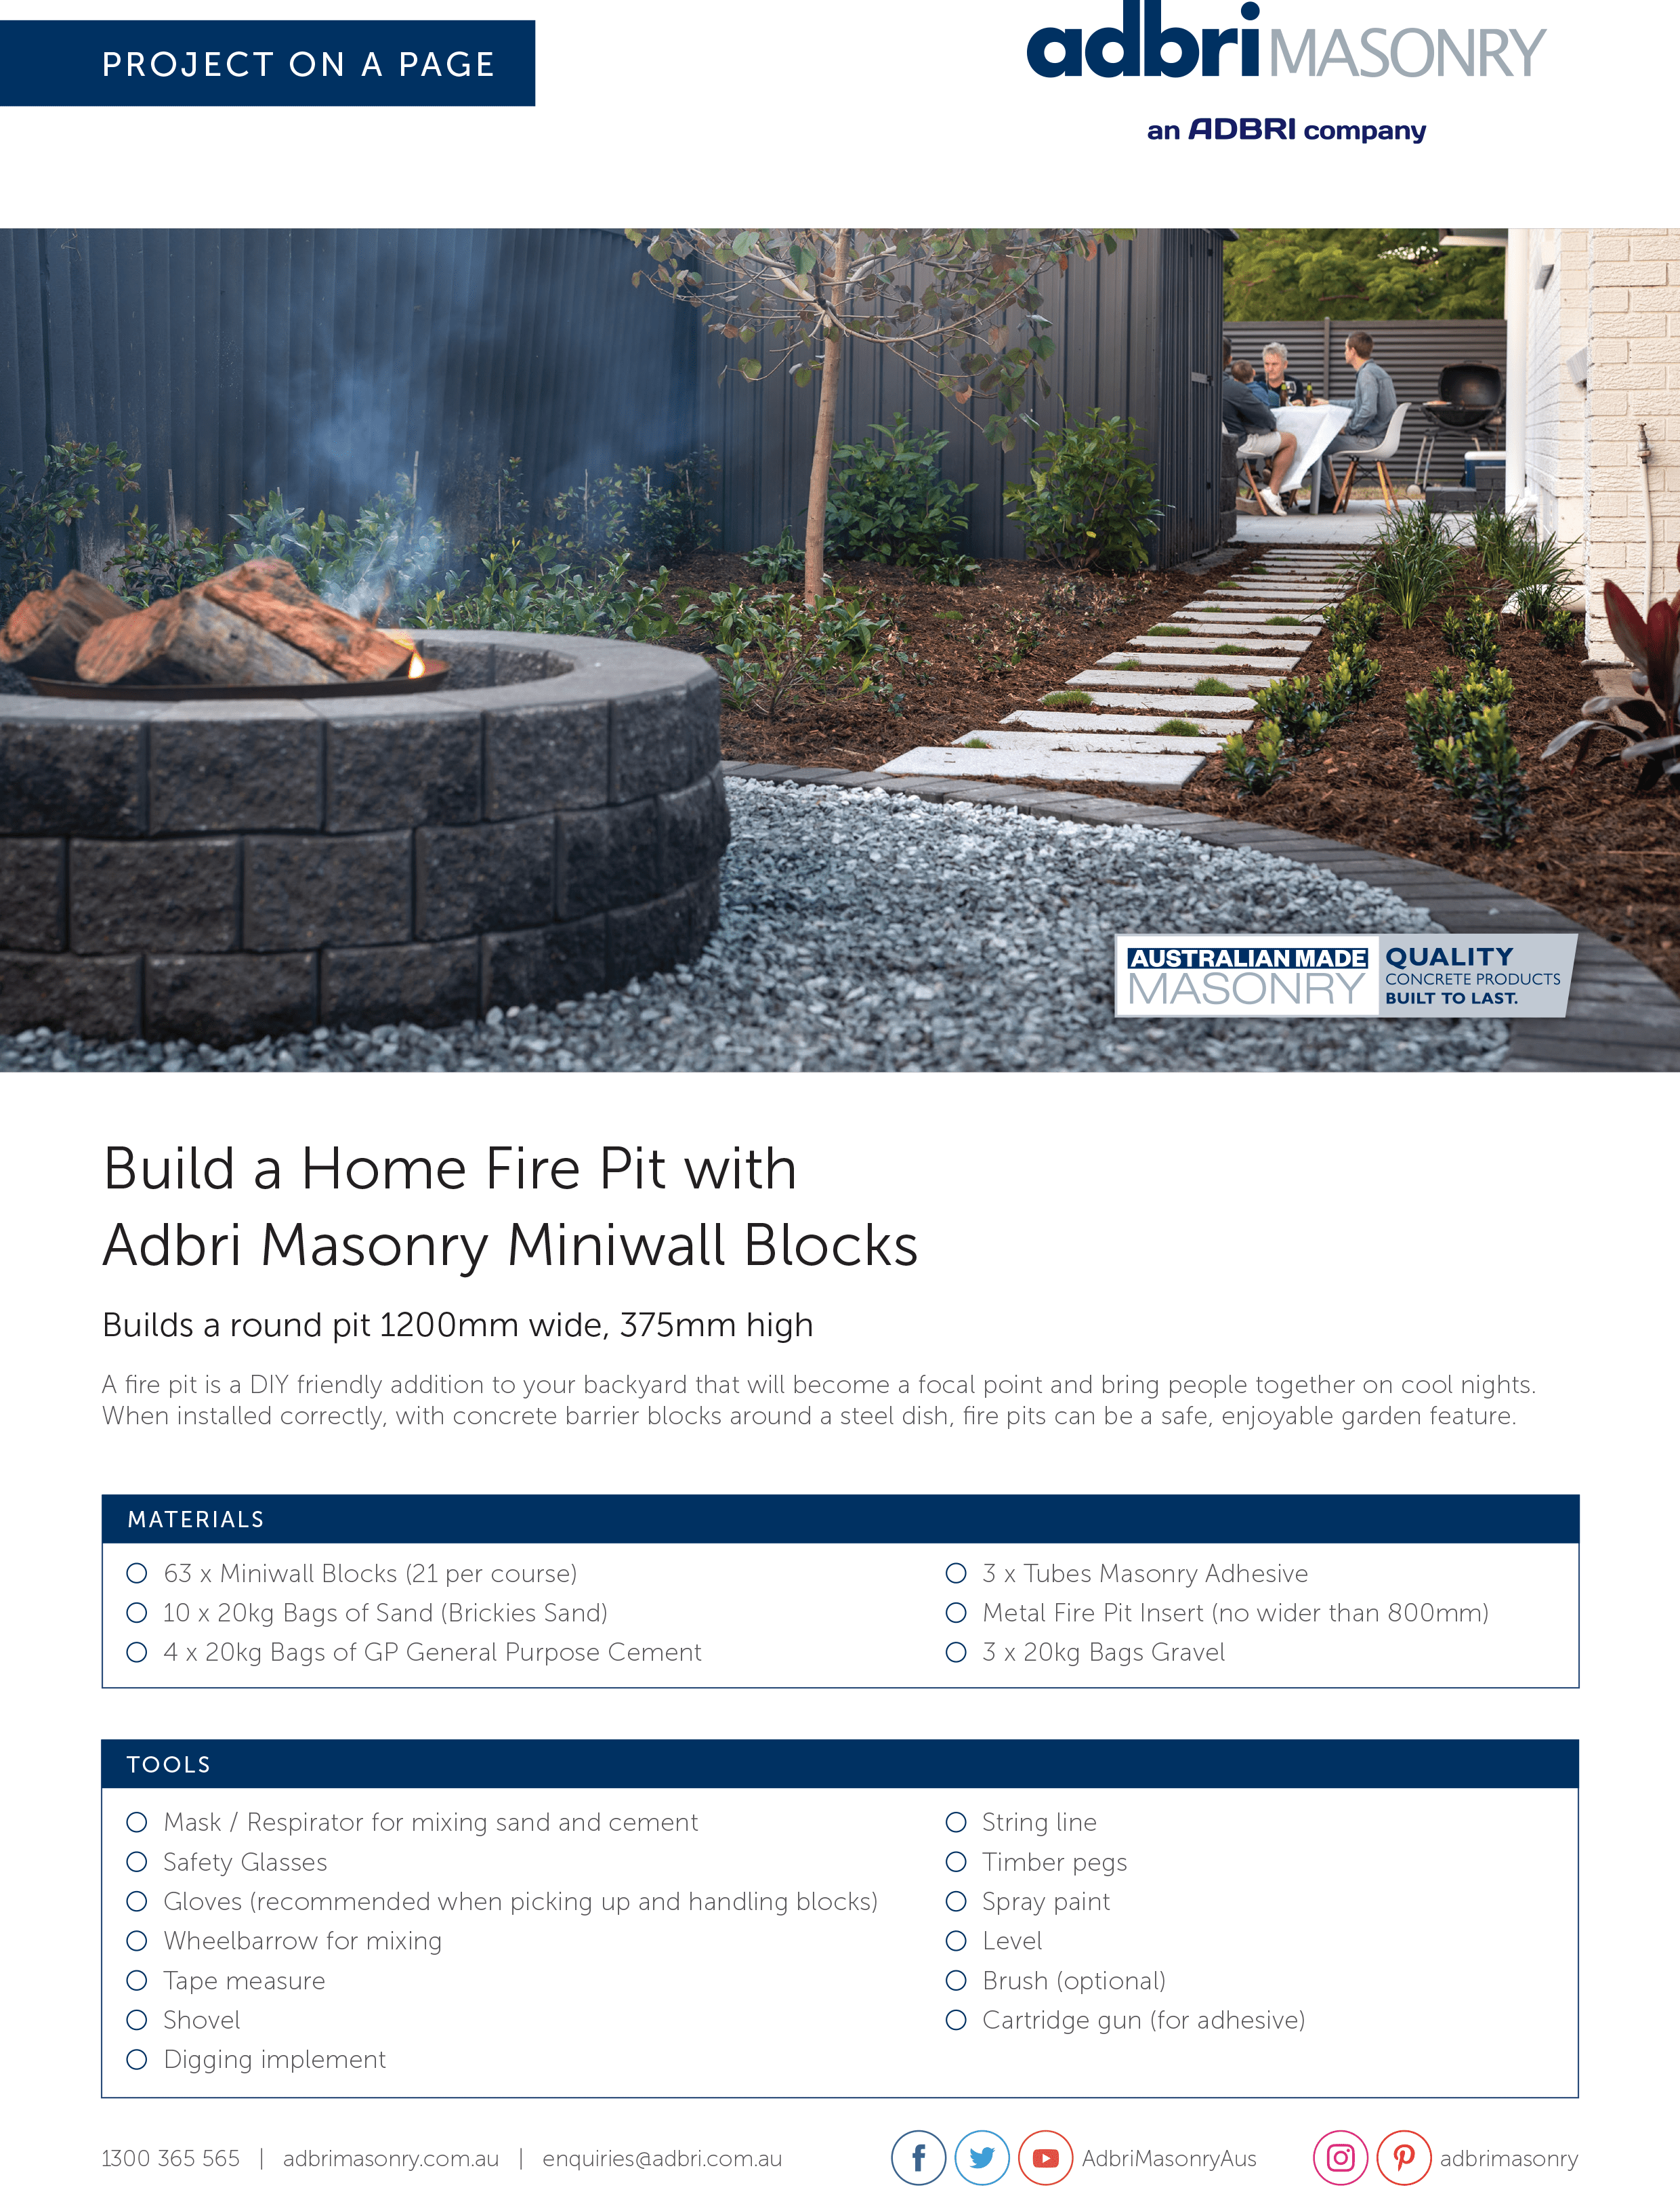 Fire Pit Project on a Page